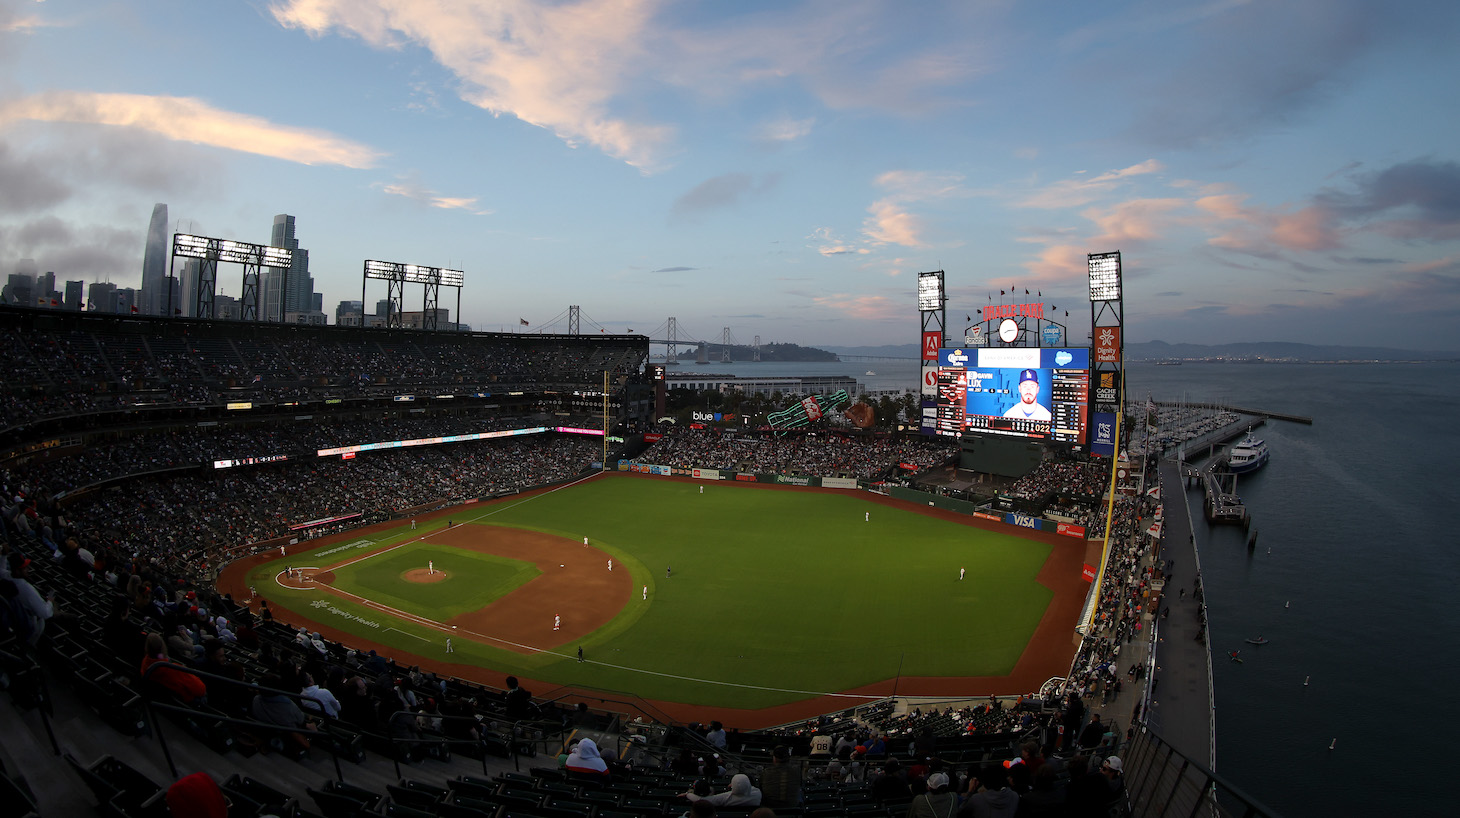 SAN FRANCISCO, CALIFORNIA - AUGUST 02: A general view during the San Francisco Giants game against the Los Angeles Dodgers at Oracle Park on August 02, 2022 in San Francisco, California. (Photo by Ezra Shaw/Getty Images)